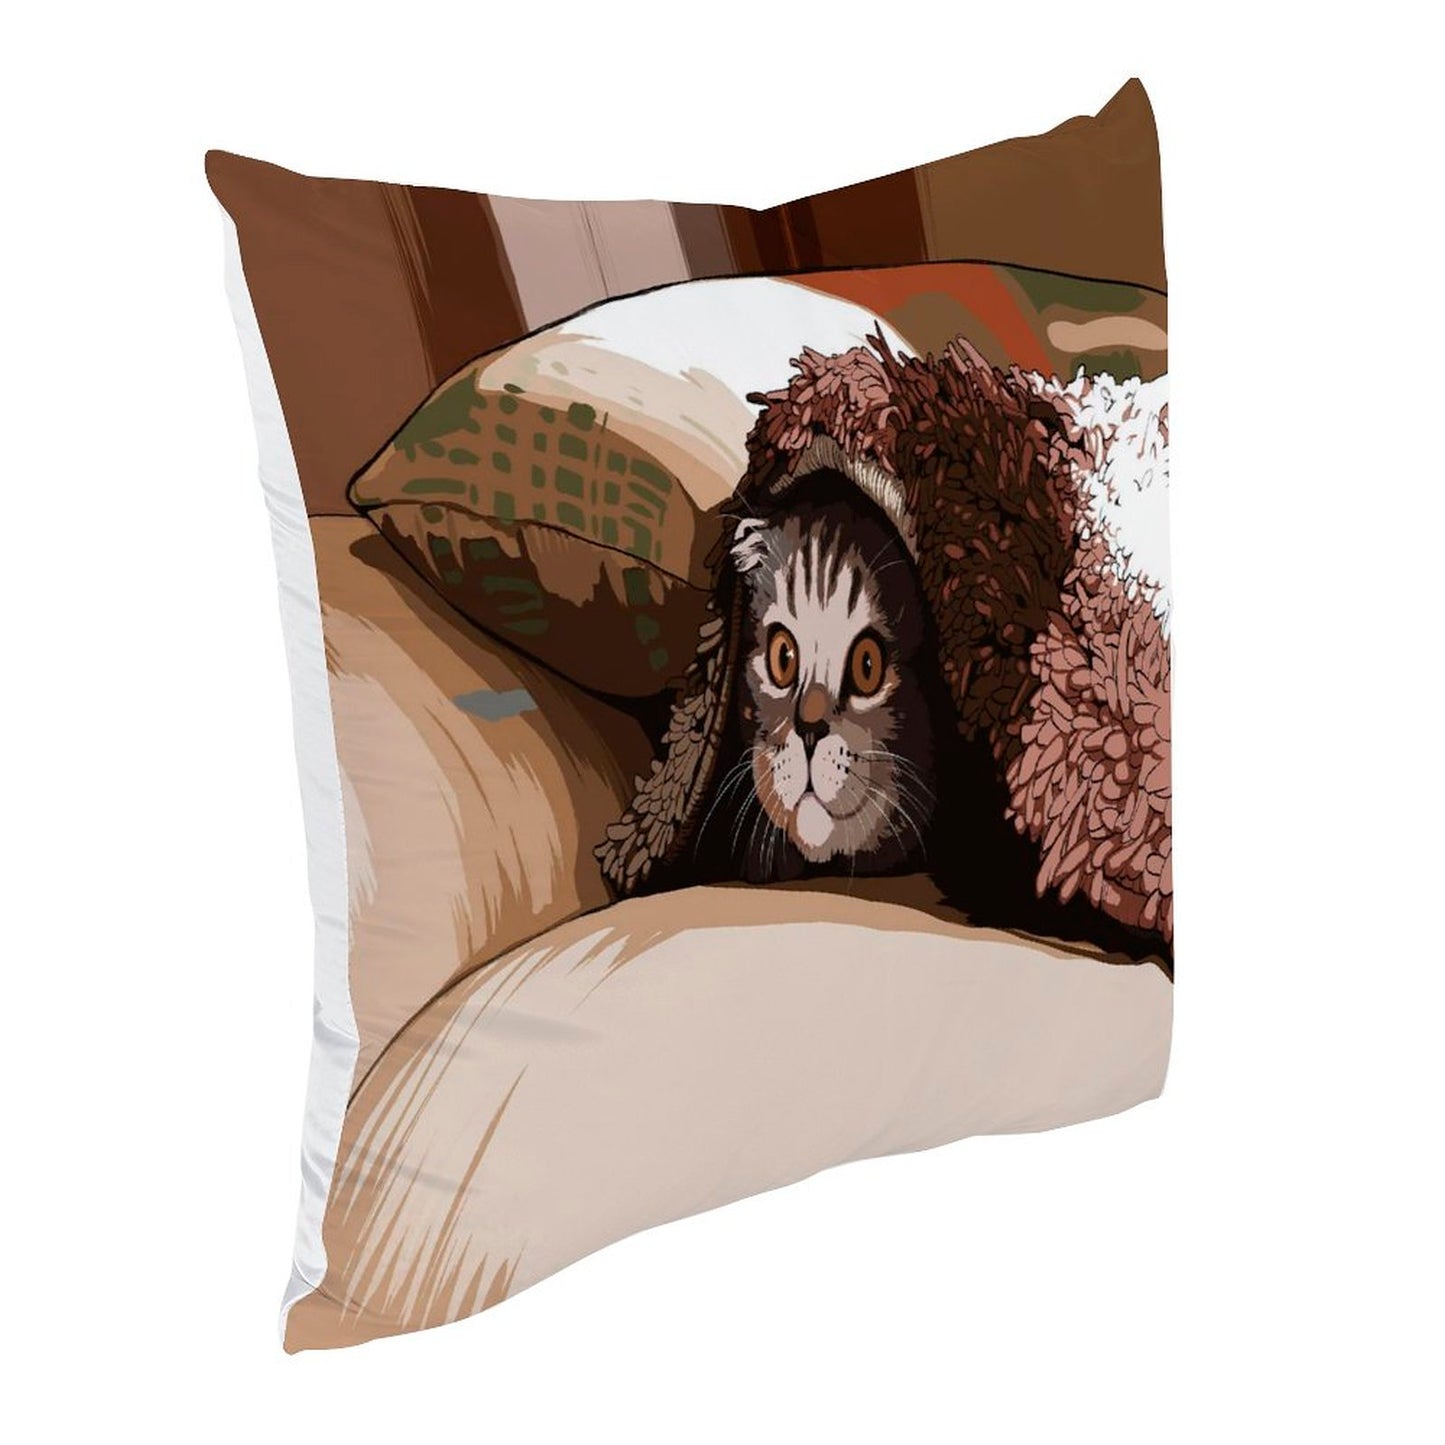 Online Customize Polyester Pillow Case Realistic Design Cat Hiding in Quilt Single-sided Printing Only Pillowcase